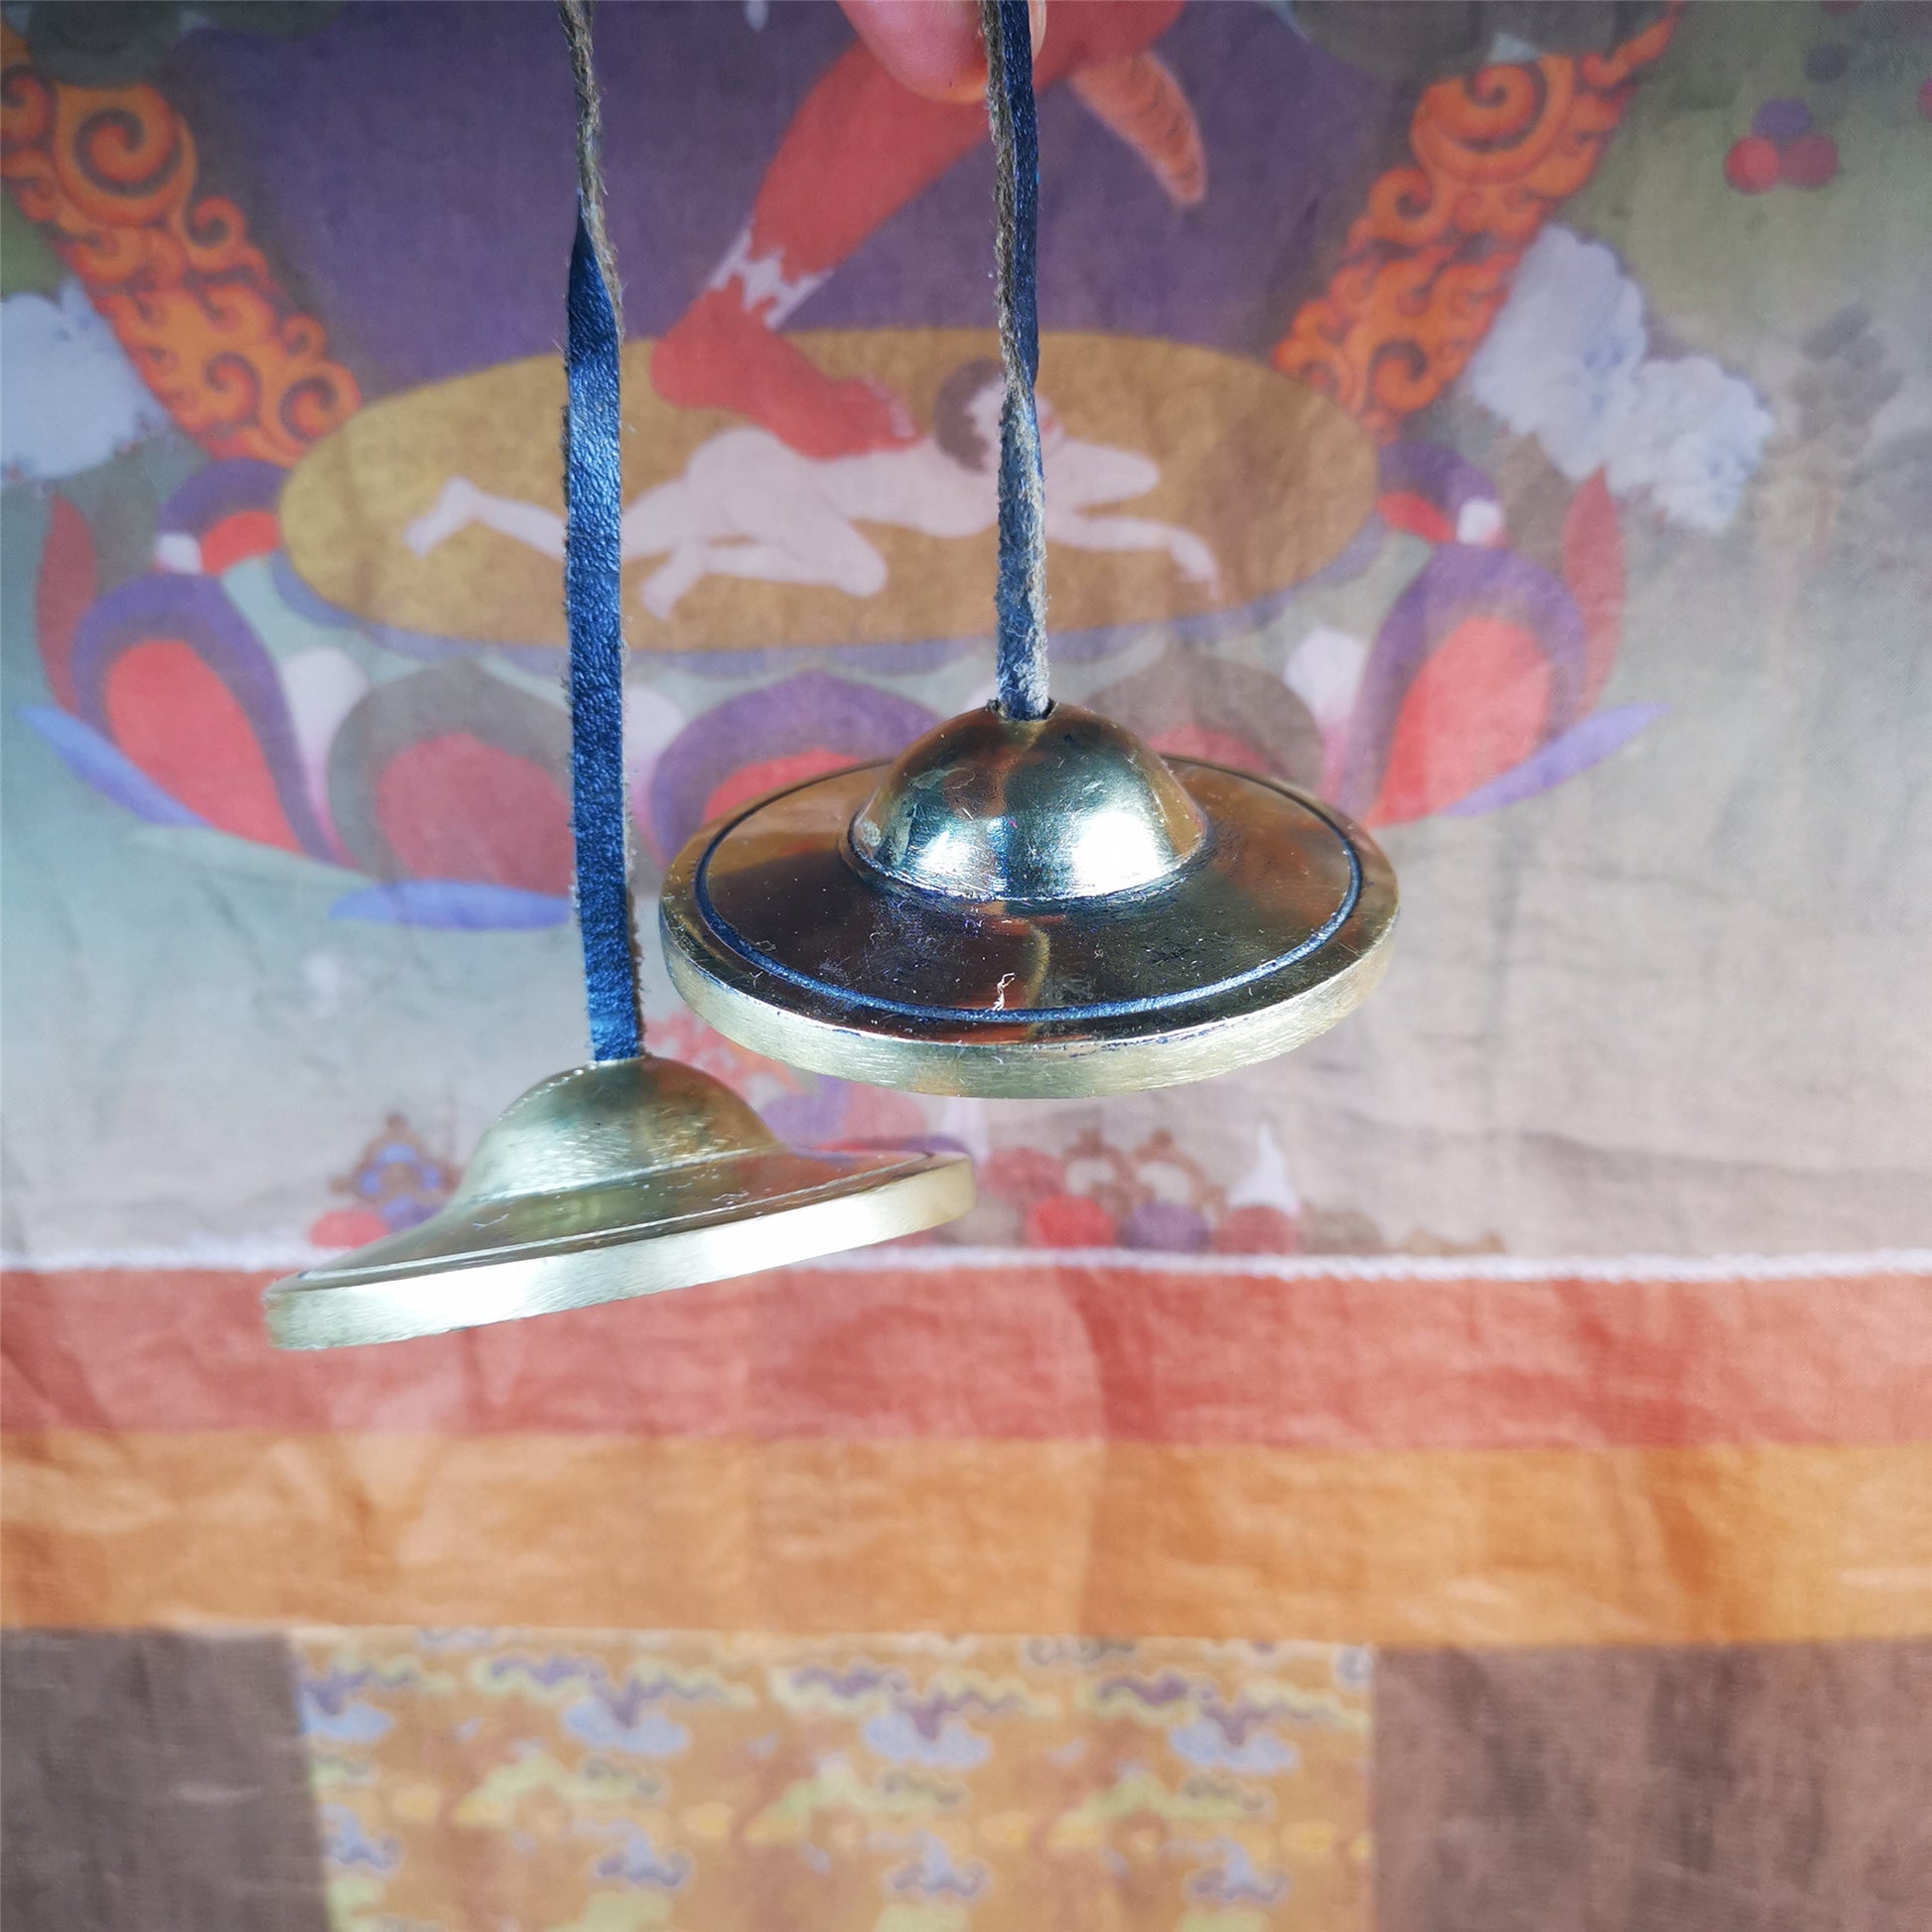 This tingsha bell set was handmade in Nepal,using traditional techniques and materials. It was made of brass,6.5cm diameter,shiny color,with pure, clear and resonant,good for meditation. Come with tingsha case.